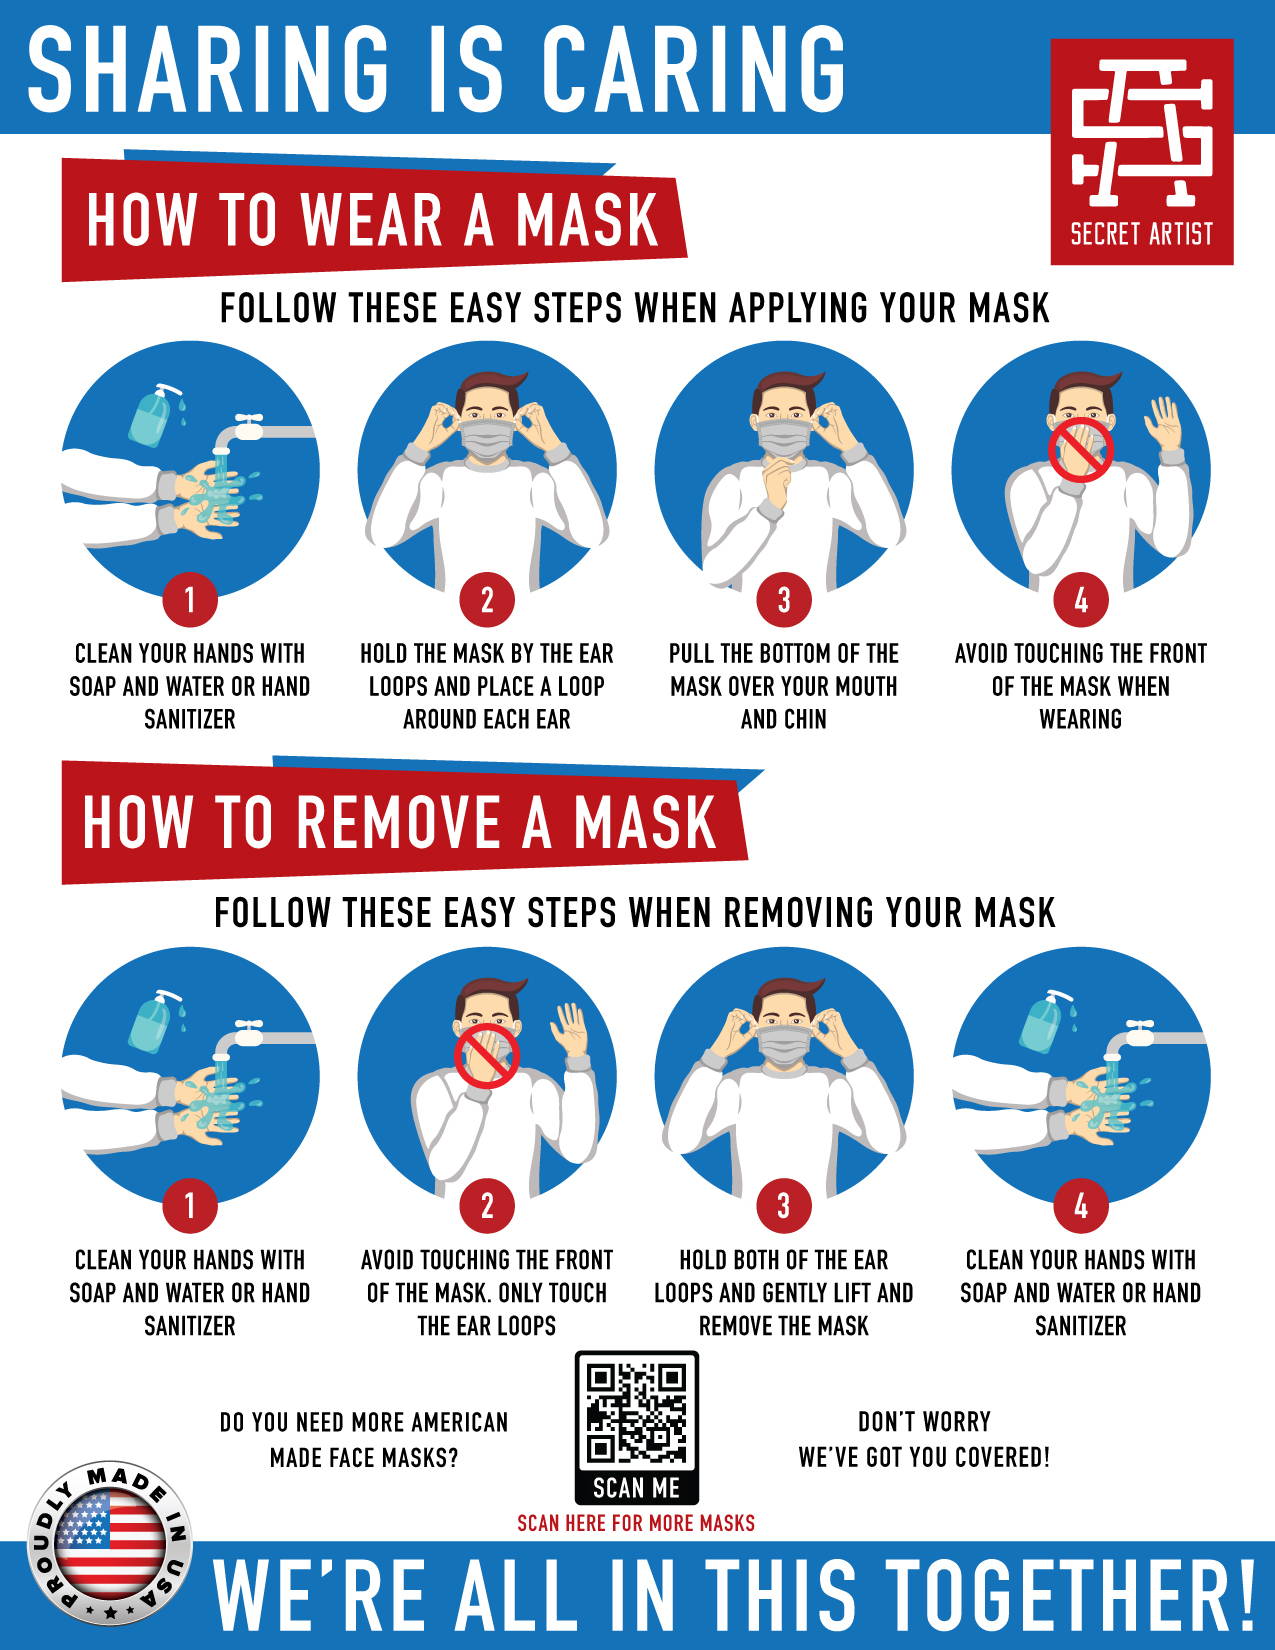 Free Face Mask And Hand Washing Posters - Secret Artist